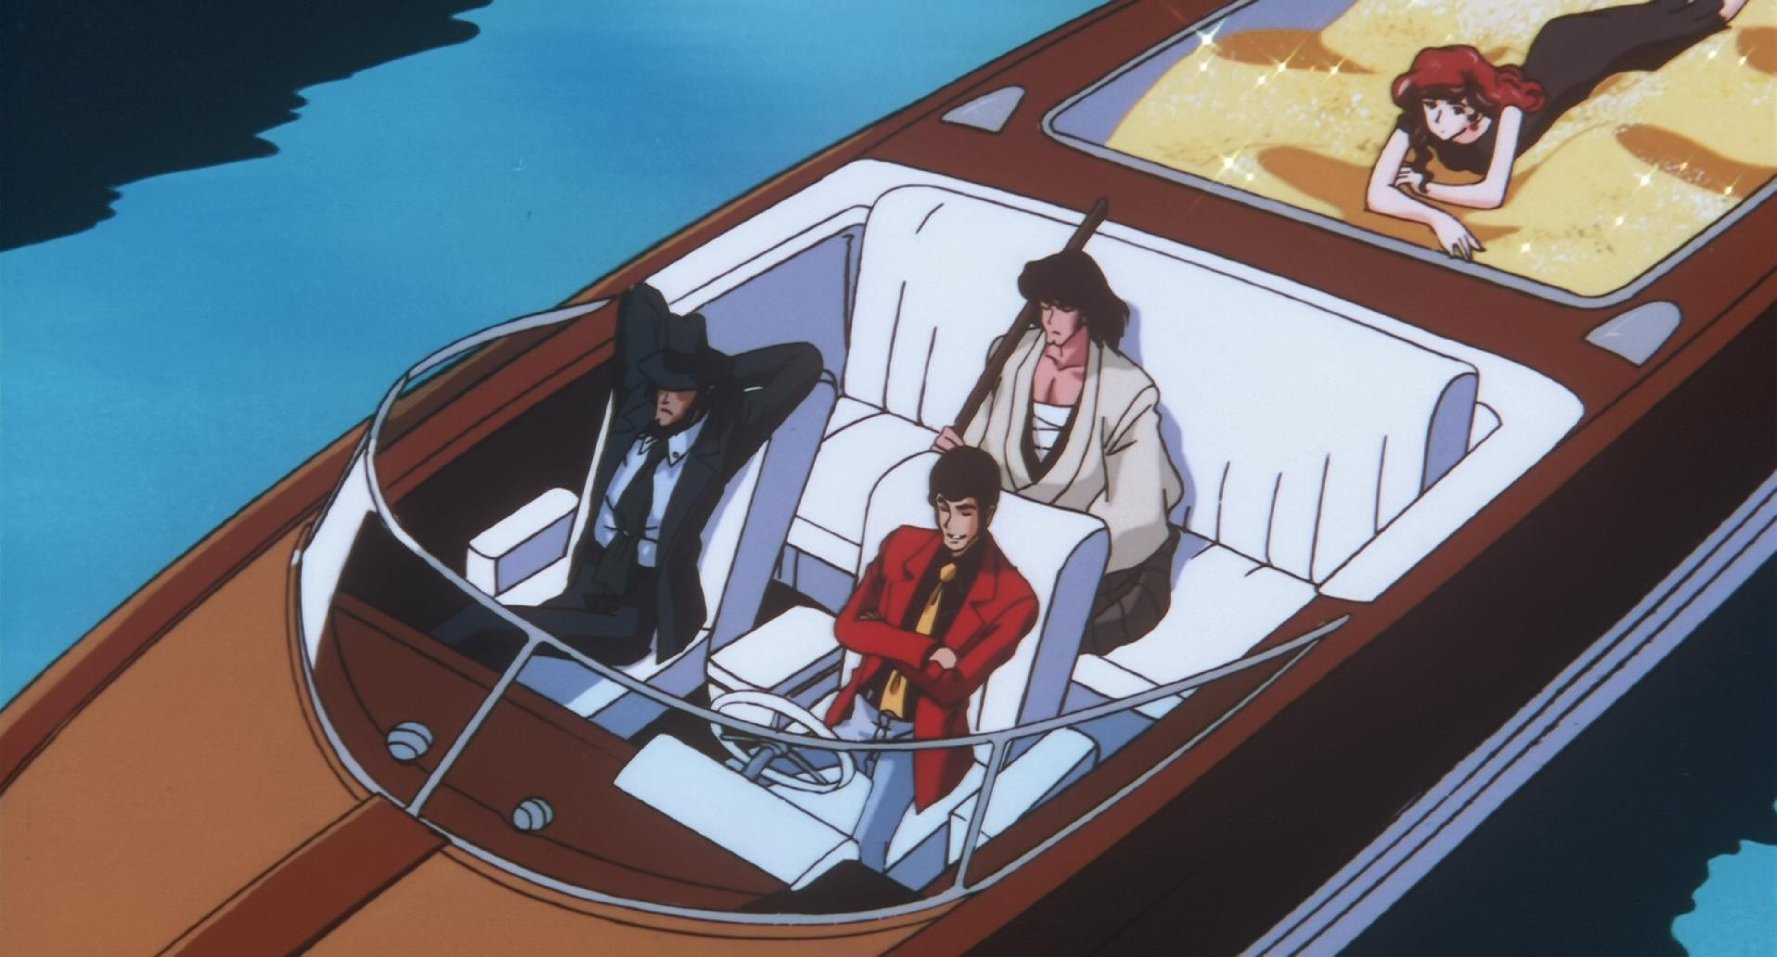 Lupin III Dead or Alive